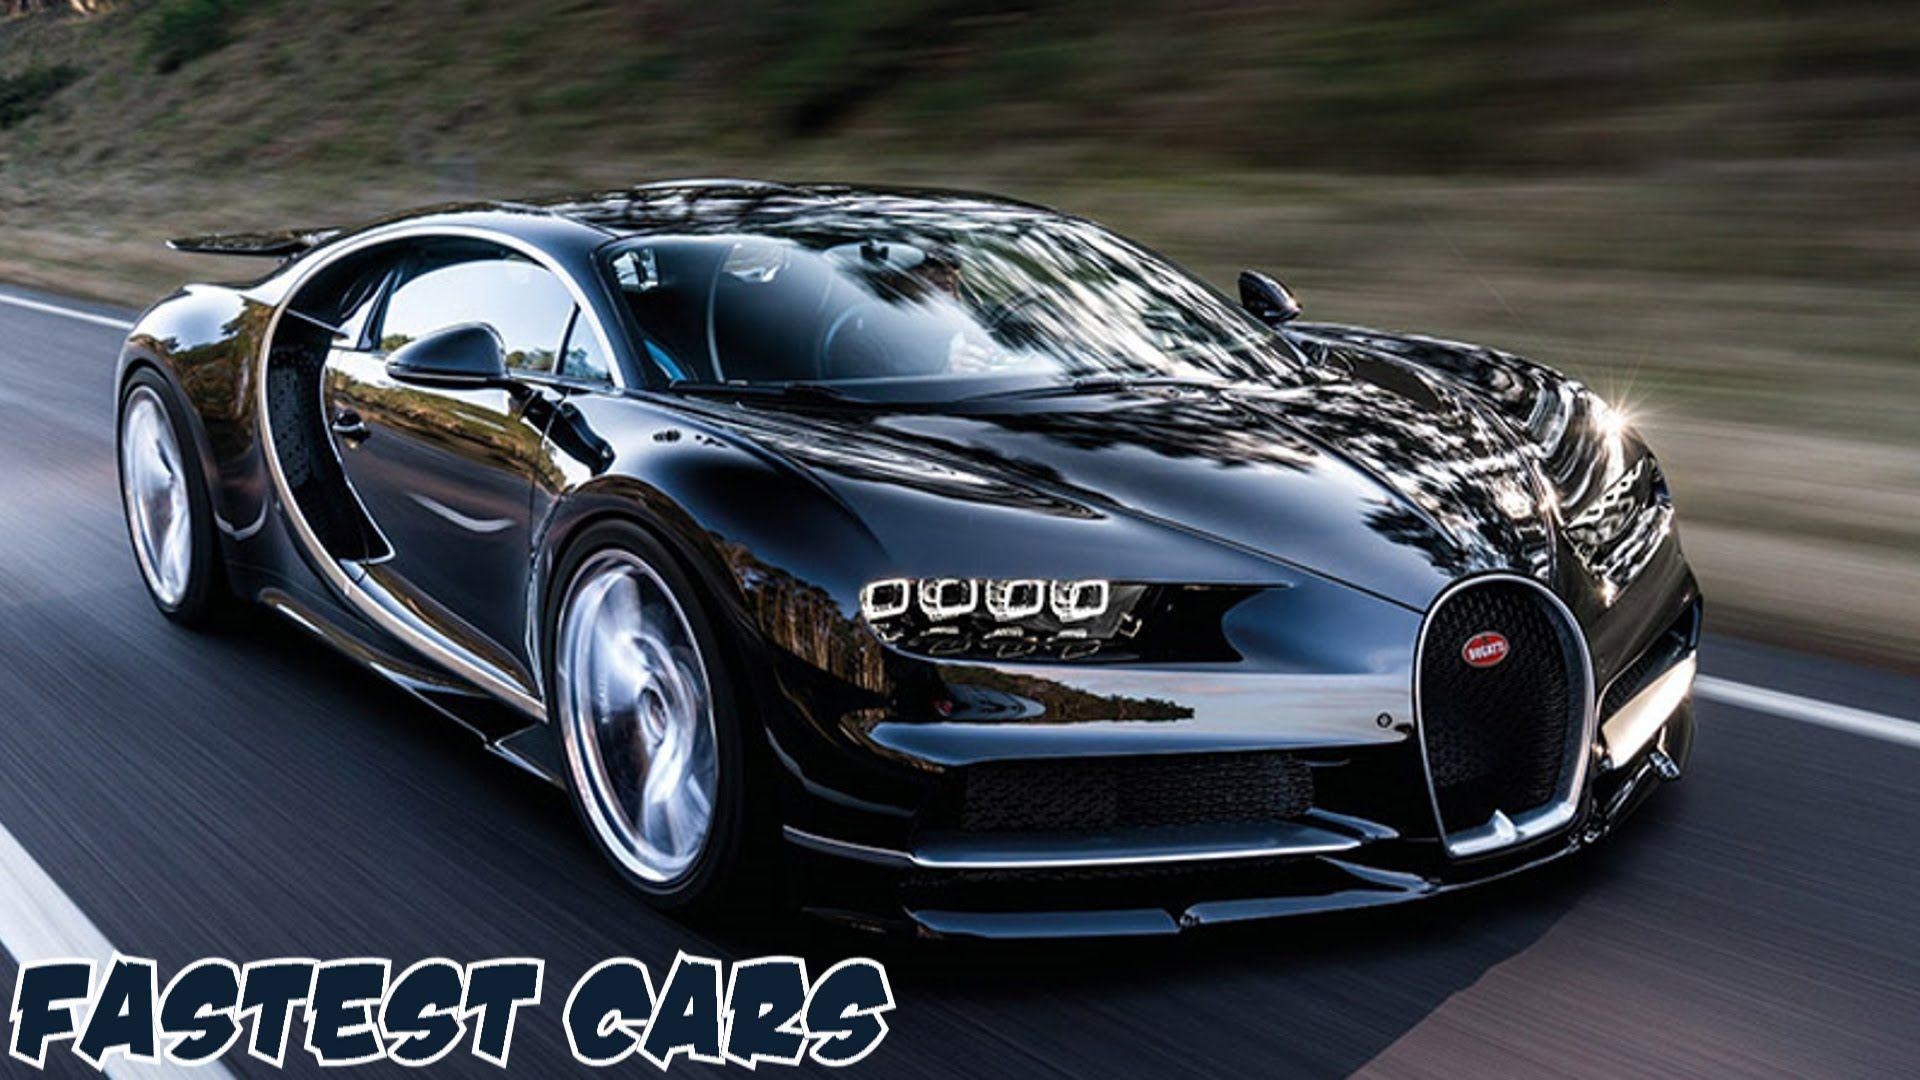 1920x1080 Top 10 Fastest Cars in the World 2016-2017 â Fast Faster Fastest .